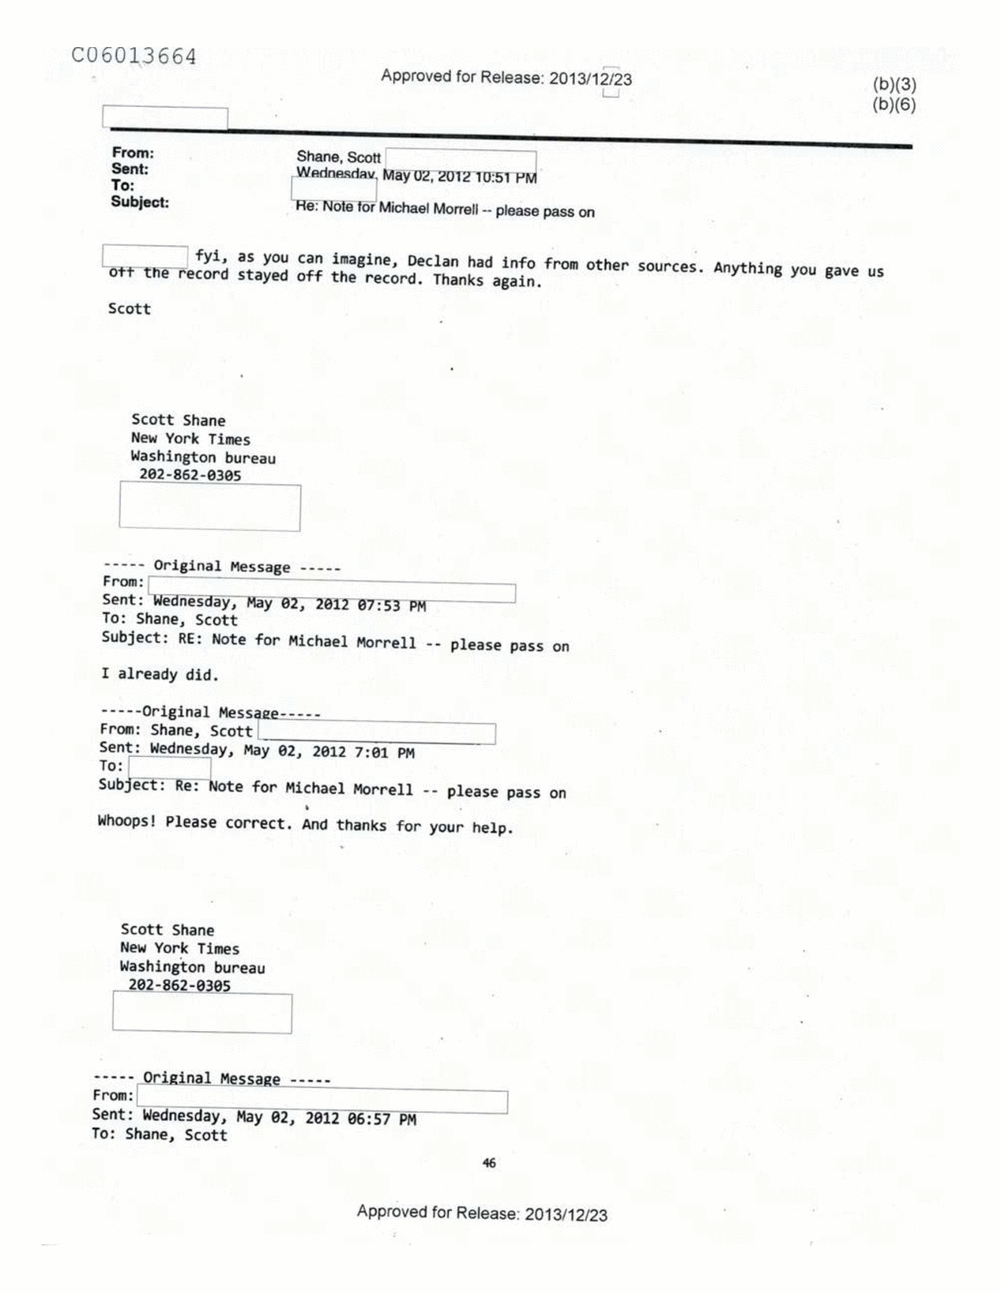 Page 510 from Email Correspondence Between Reporters and CIA Flacks